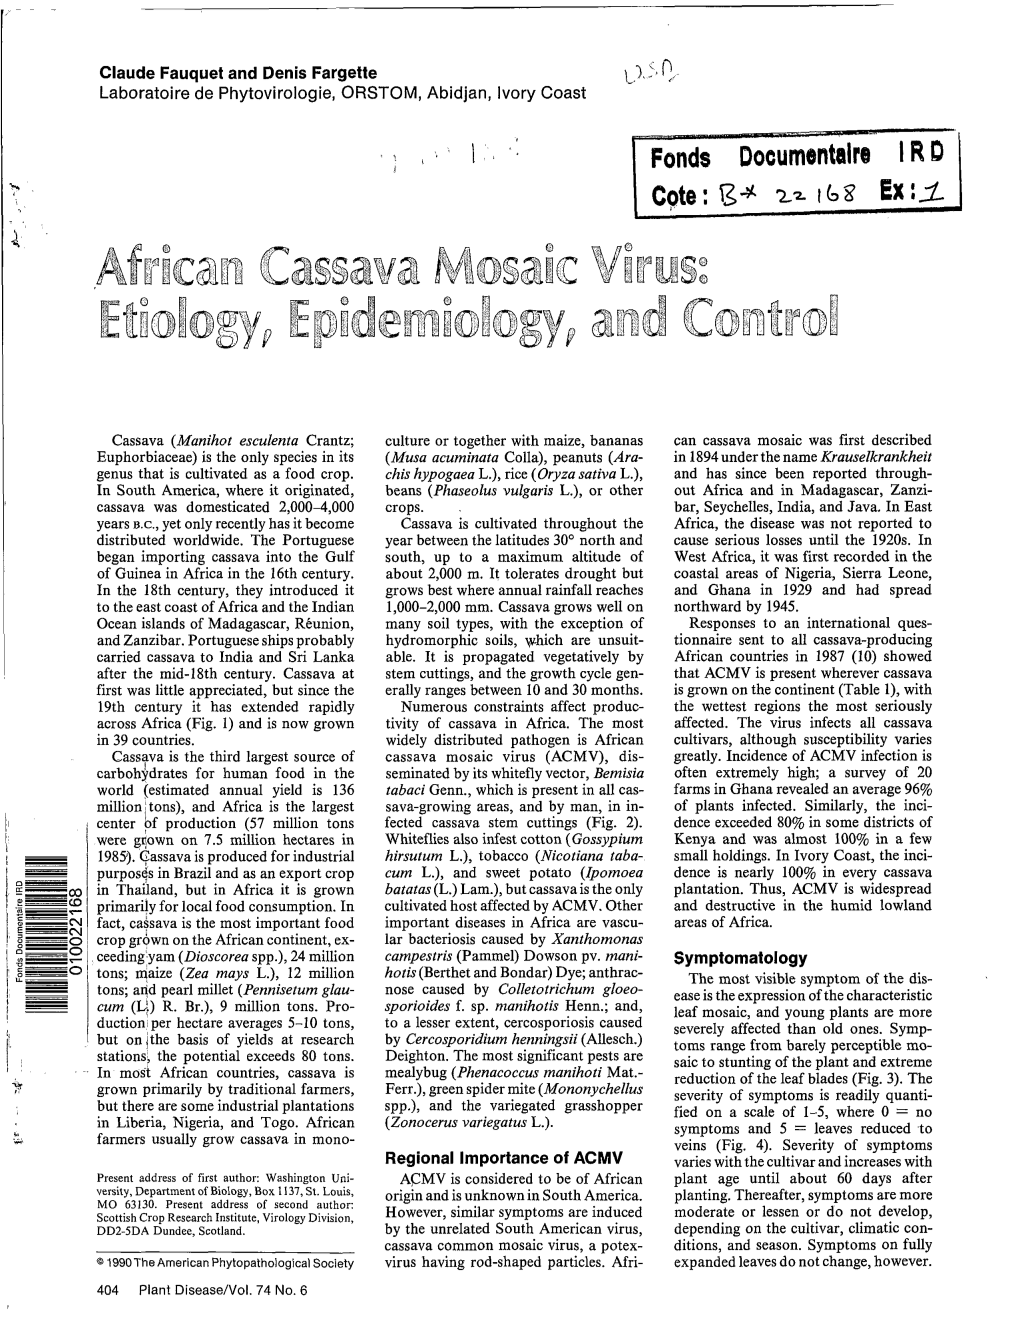 African Cassava Mosaic Virus Is Transmitted by (A) the Adult Whitefly (Bemisia Fabaci) and (B) Infected Stem Cuttings of Cassava